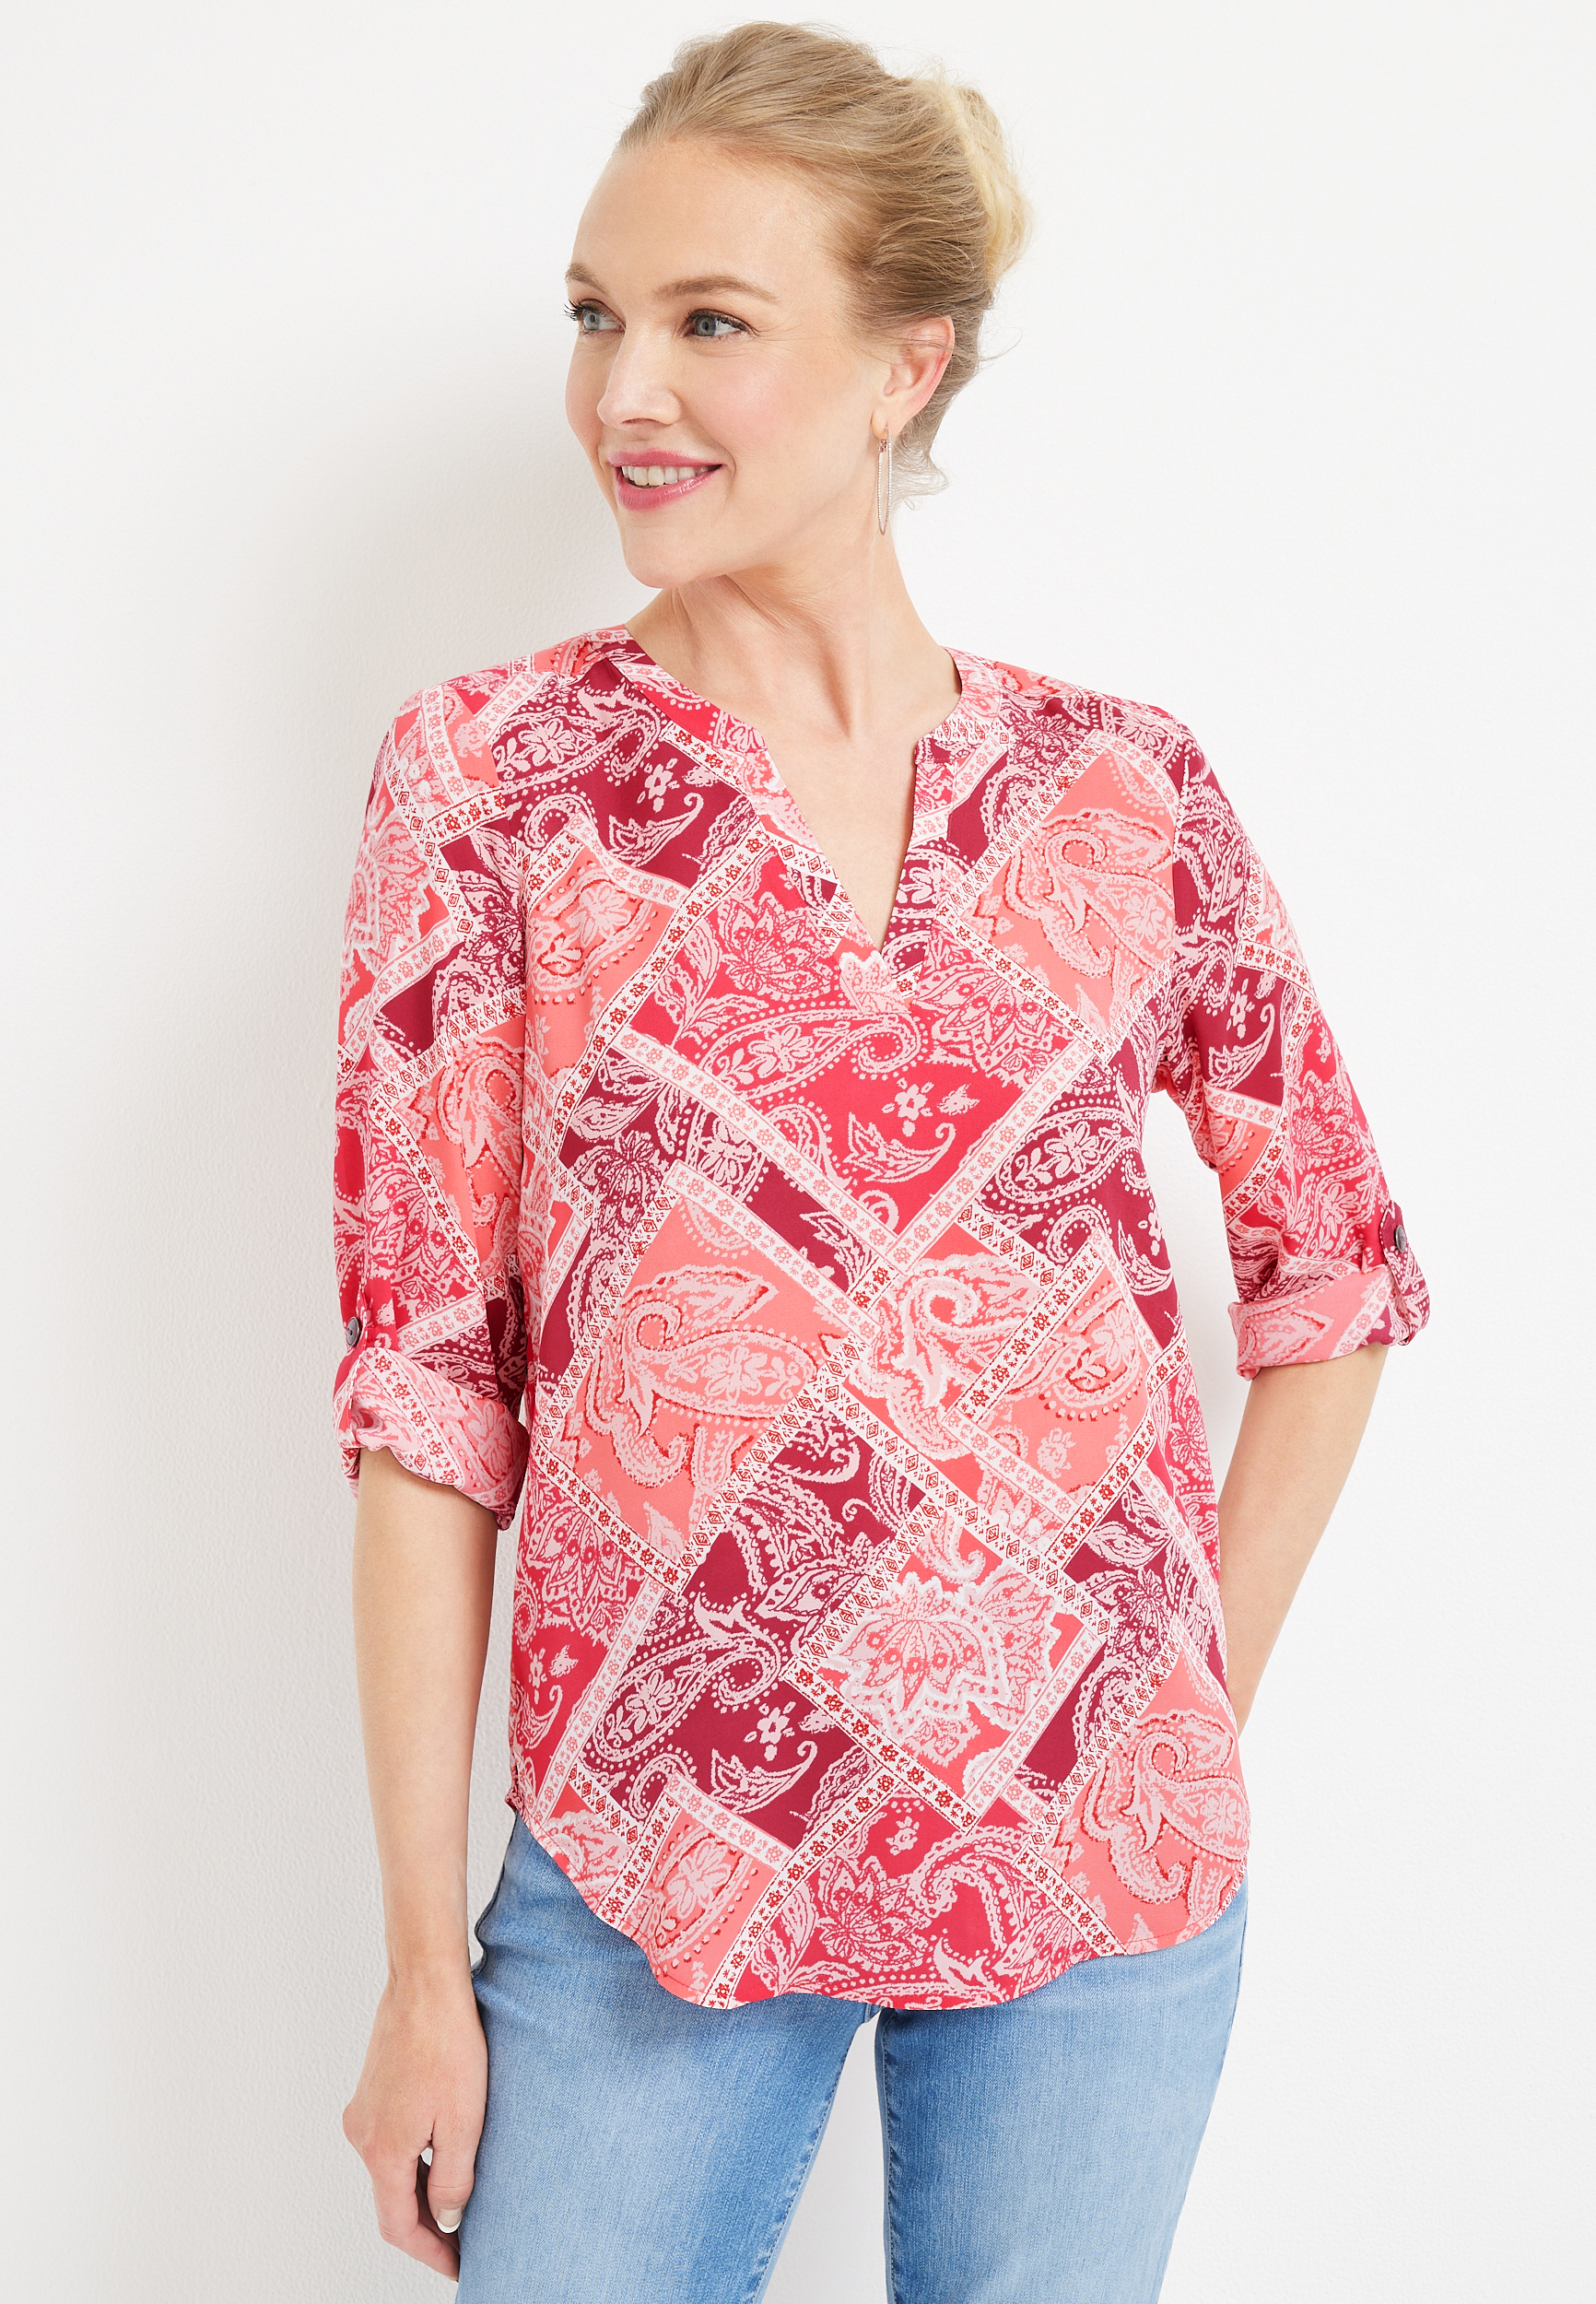 Atwood Paisley Patchwork 3/4 Sleeve Popover Blouse | maurices